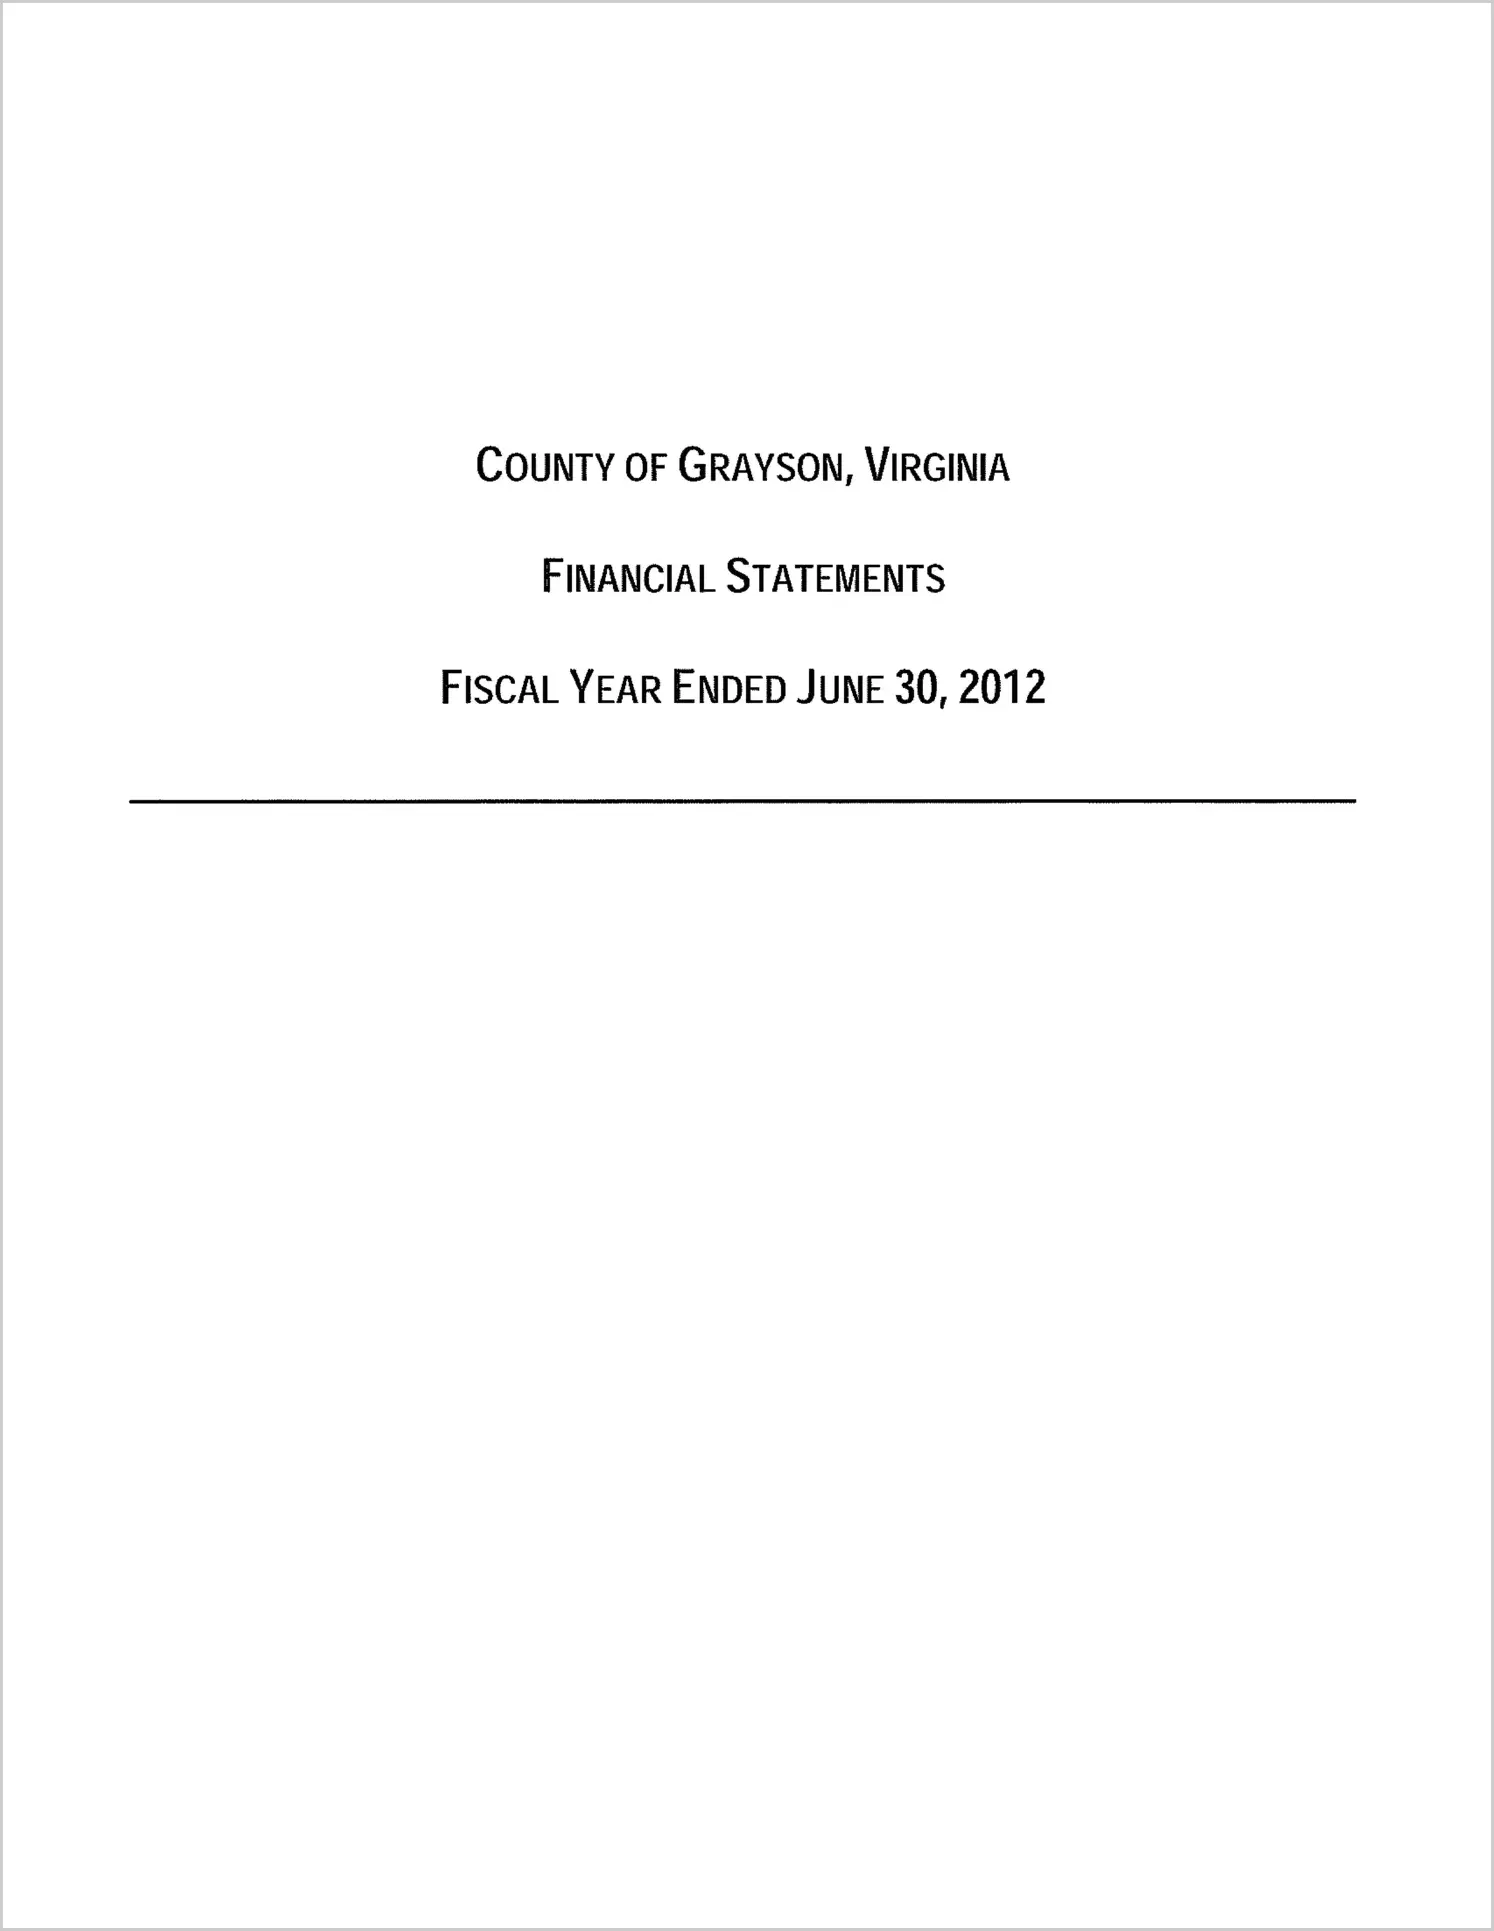 2012 Annual Financial Report for County of Grayson